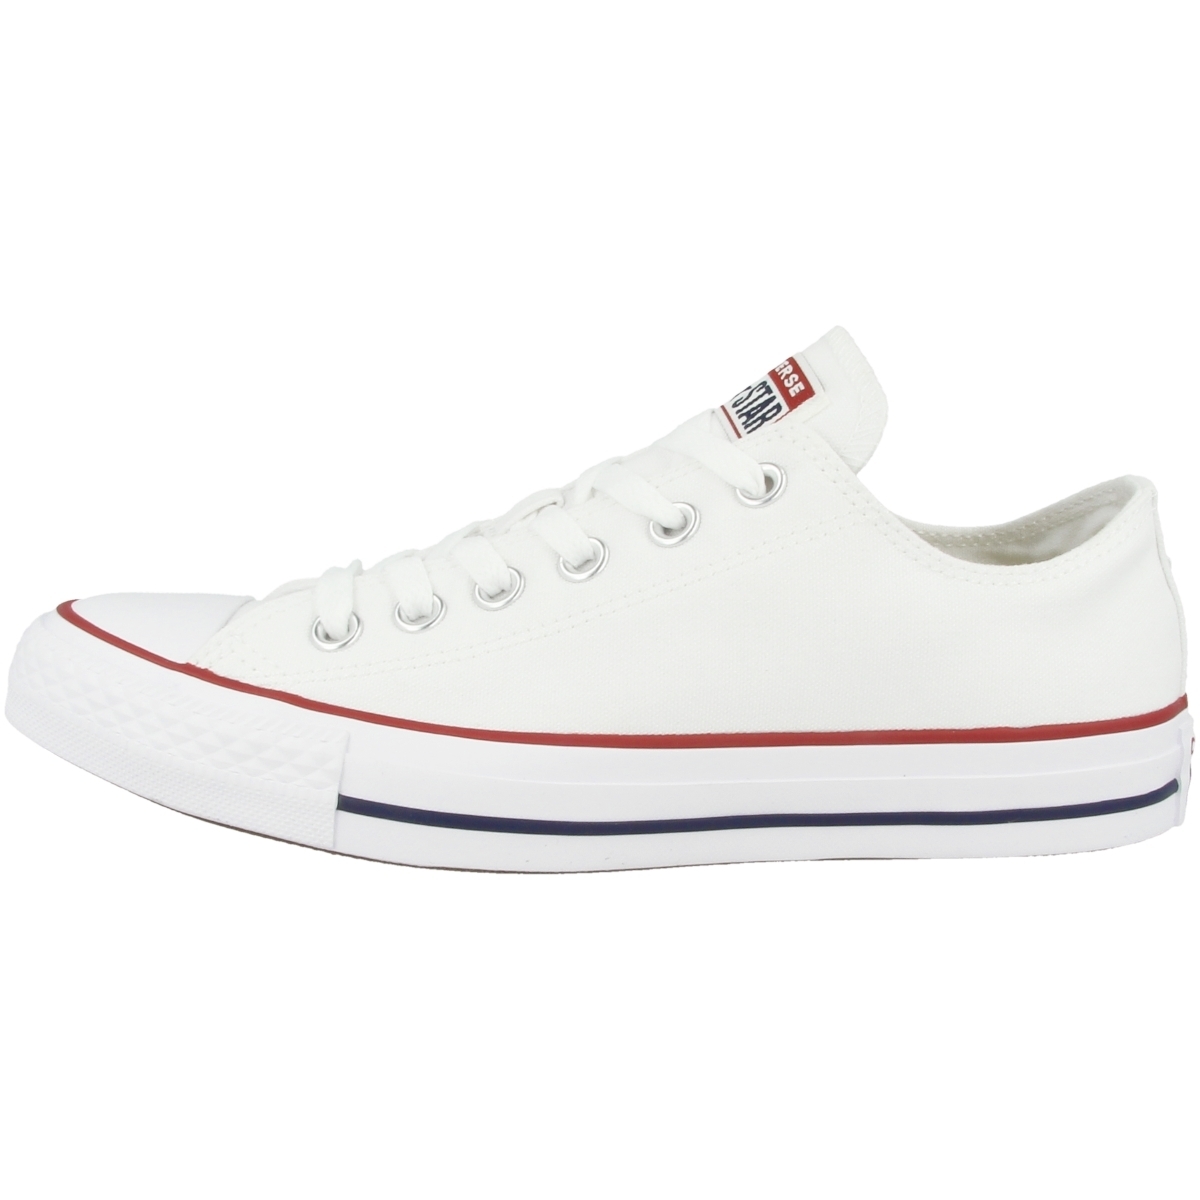 Converse Chuck Taylor All Star OX Sneaker low